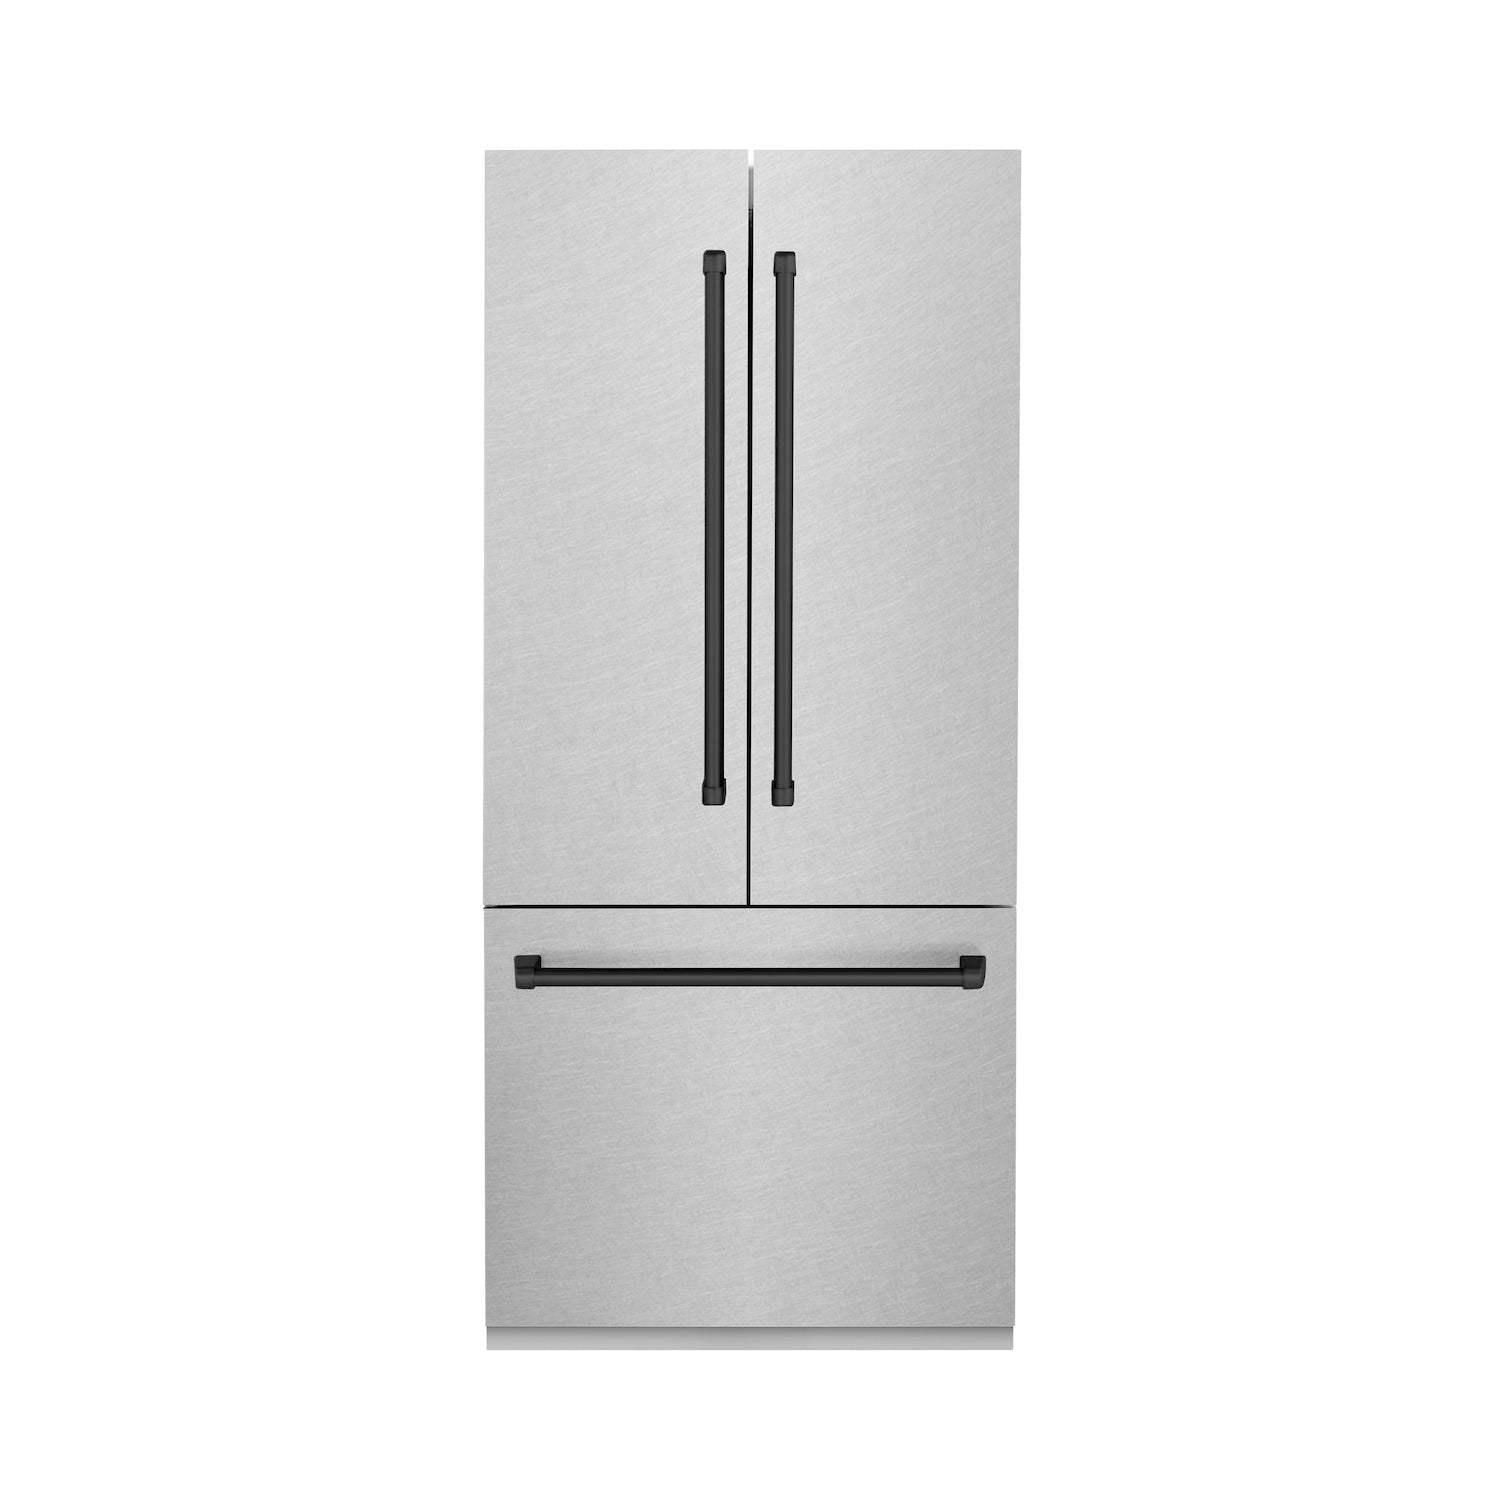 ZLINE Autograph Edition 36 in. 19.6 cu. ft. Built-in 2-Door Bottom Freezer Refrigerator with Internal Water and Ice Dispenser in Fingerprint Resistant Stainless Steel with Matte Black Accents (RBIVZ-SN-36-MB) 